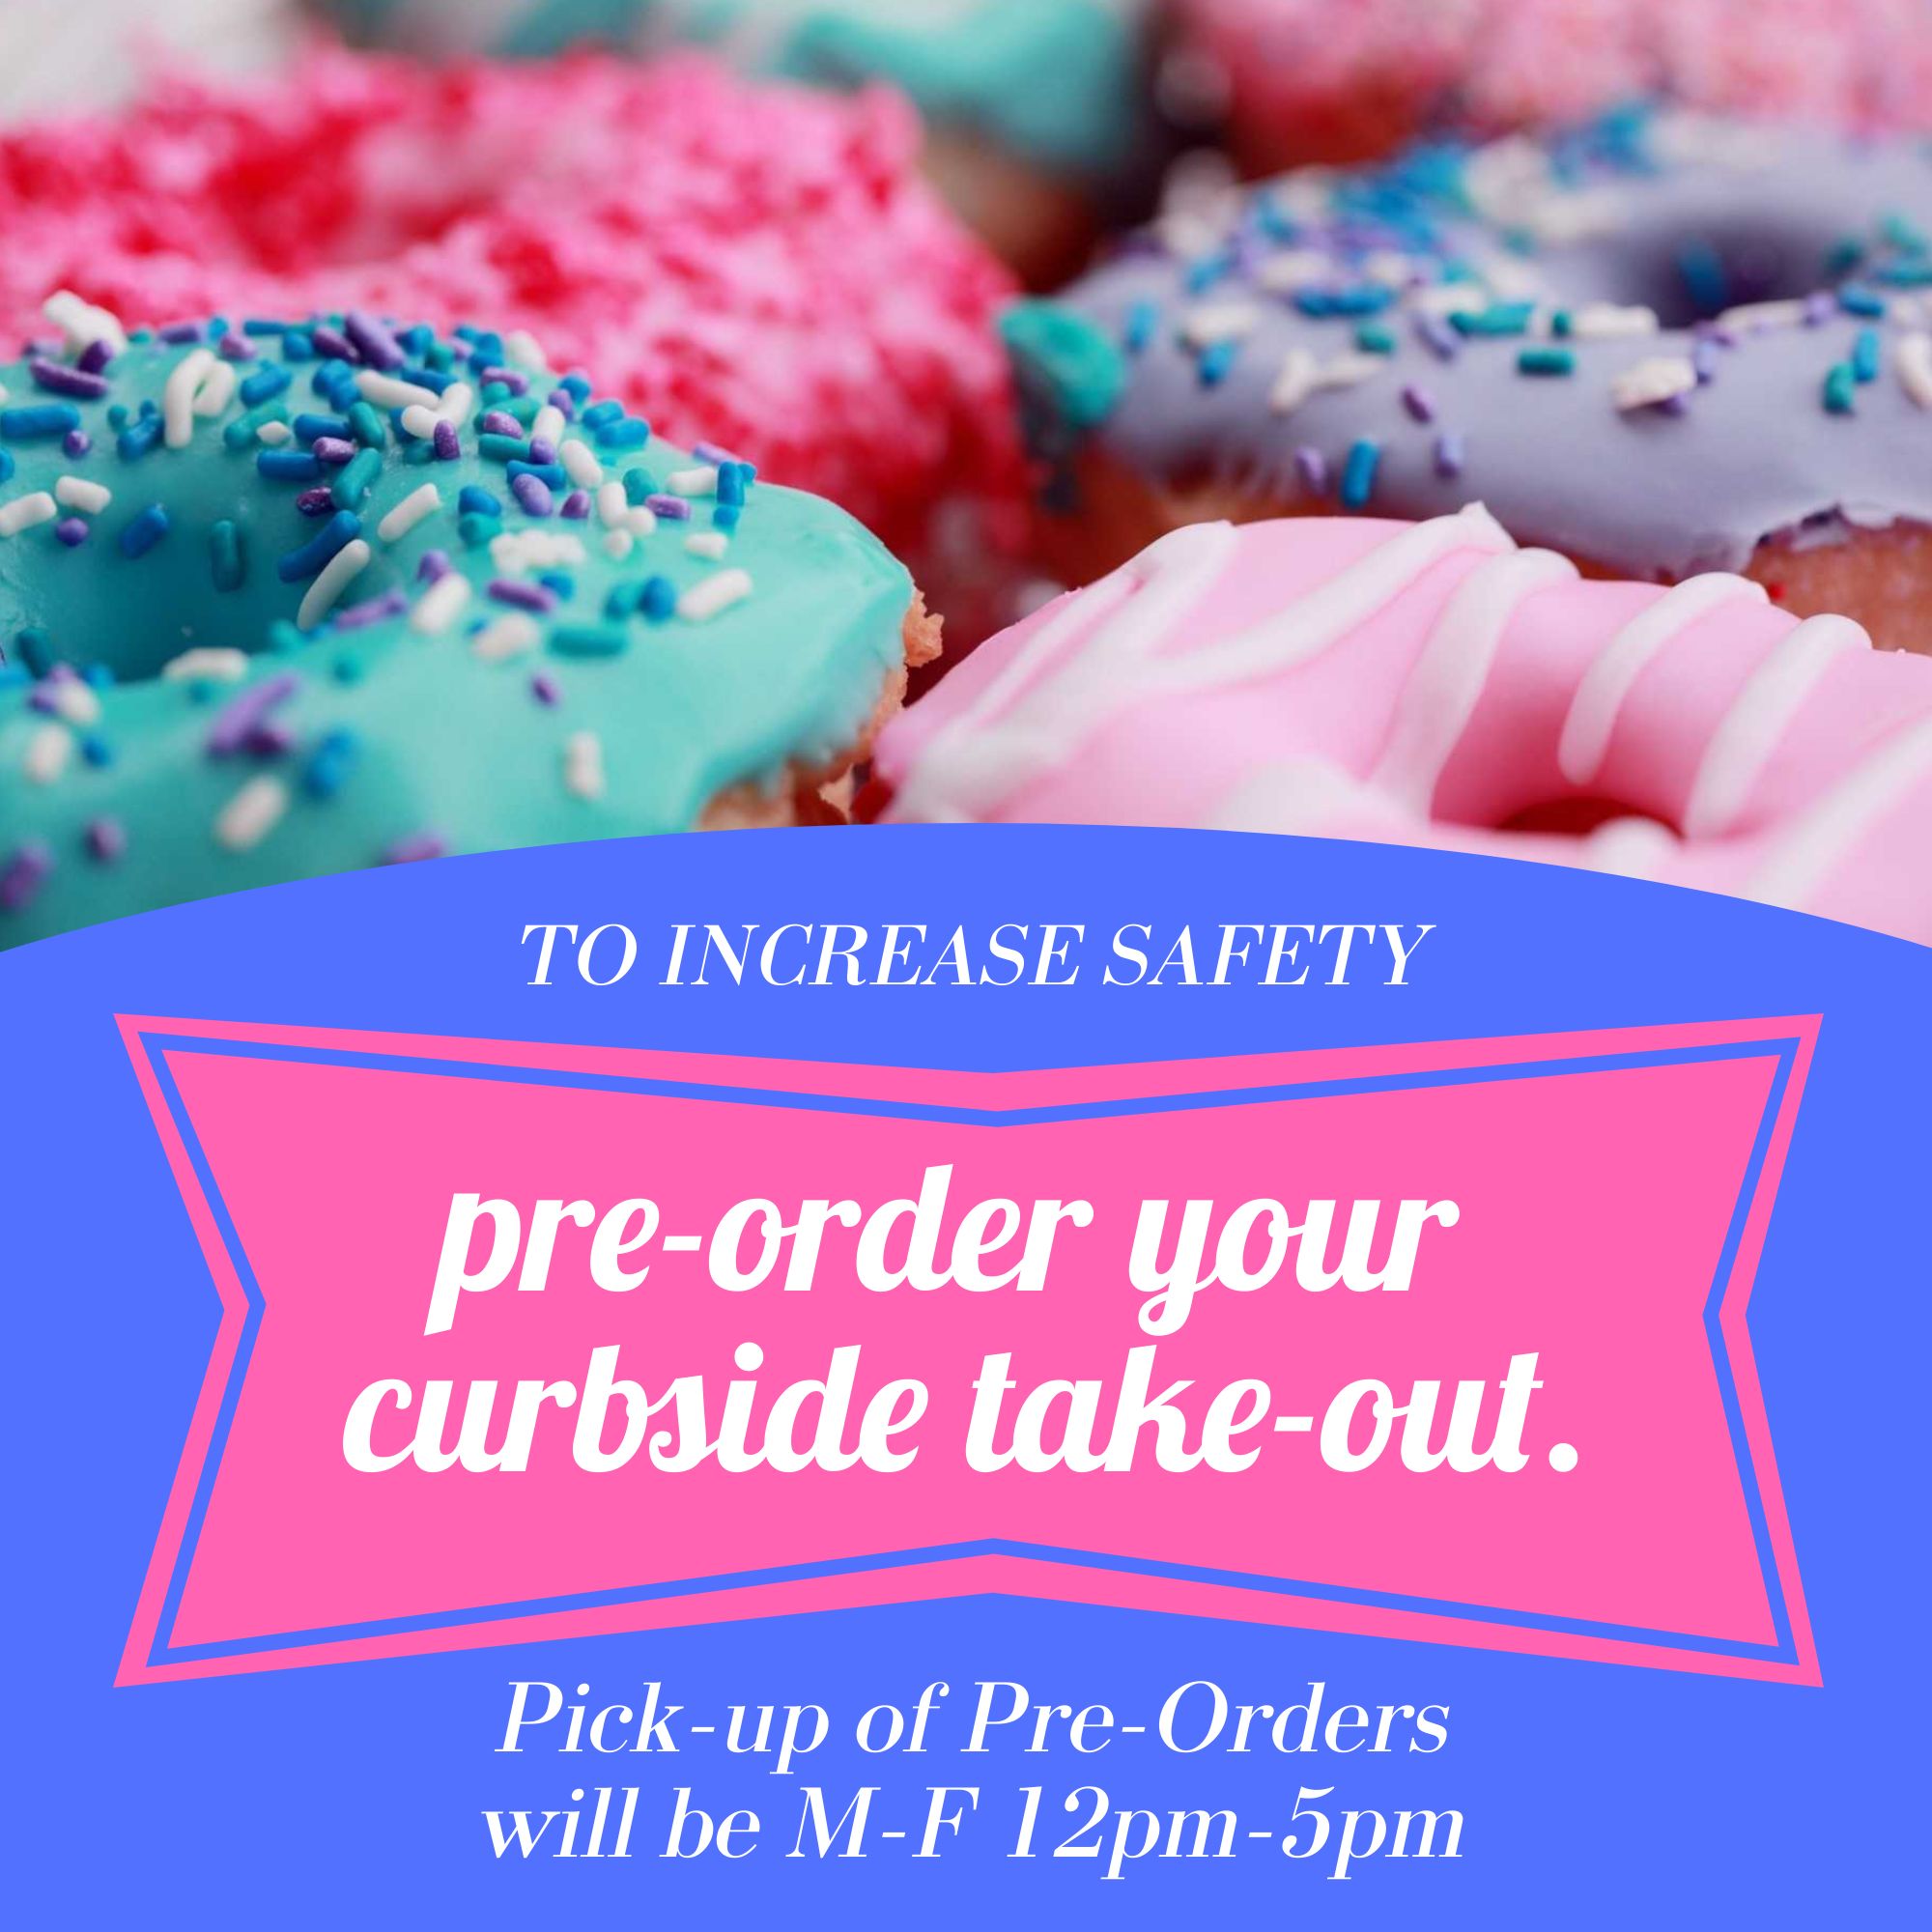 Preorder Takeout Instagram Post